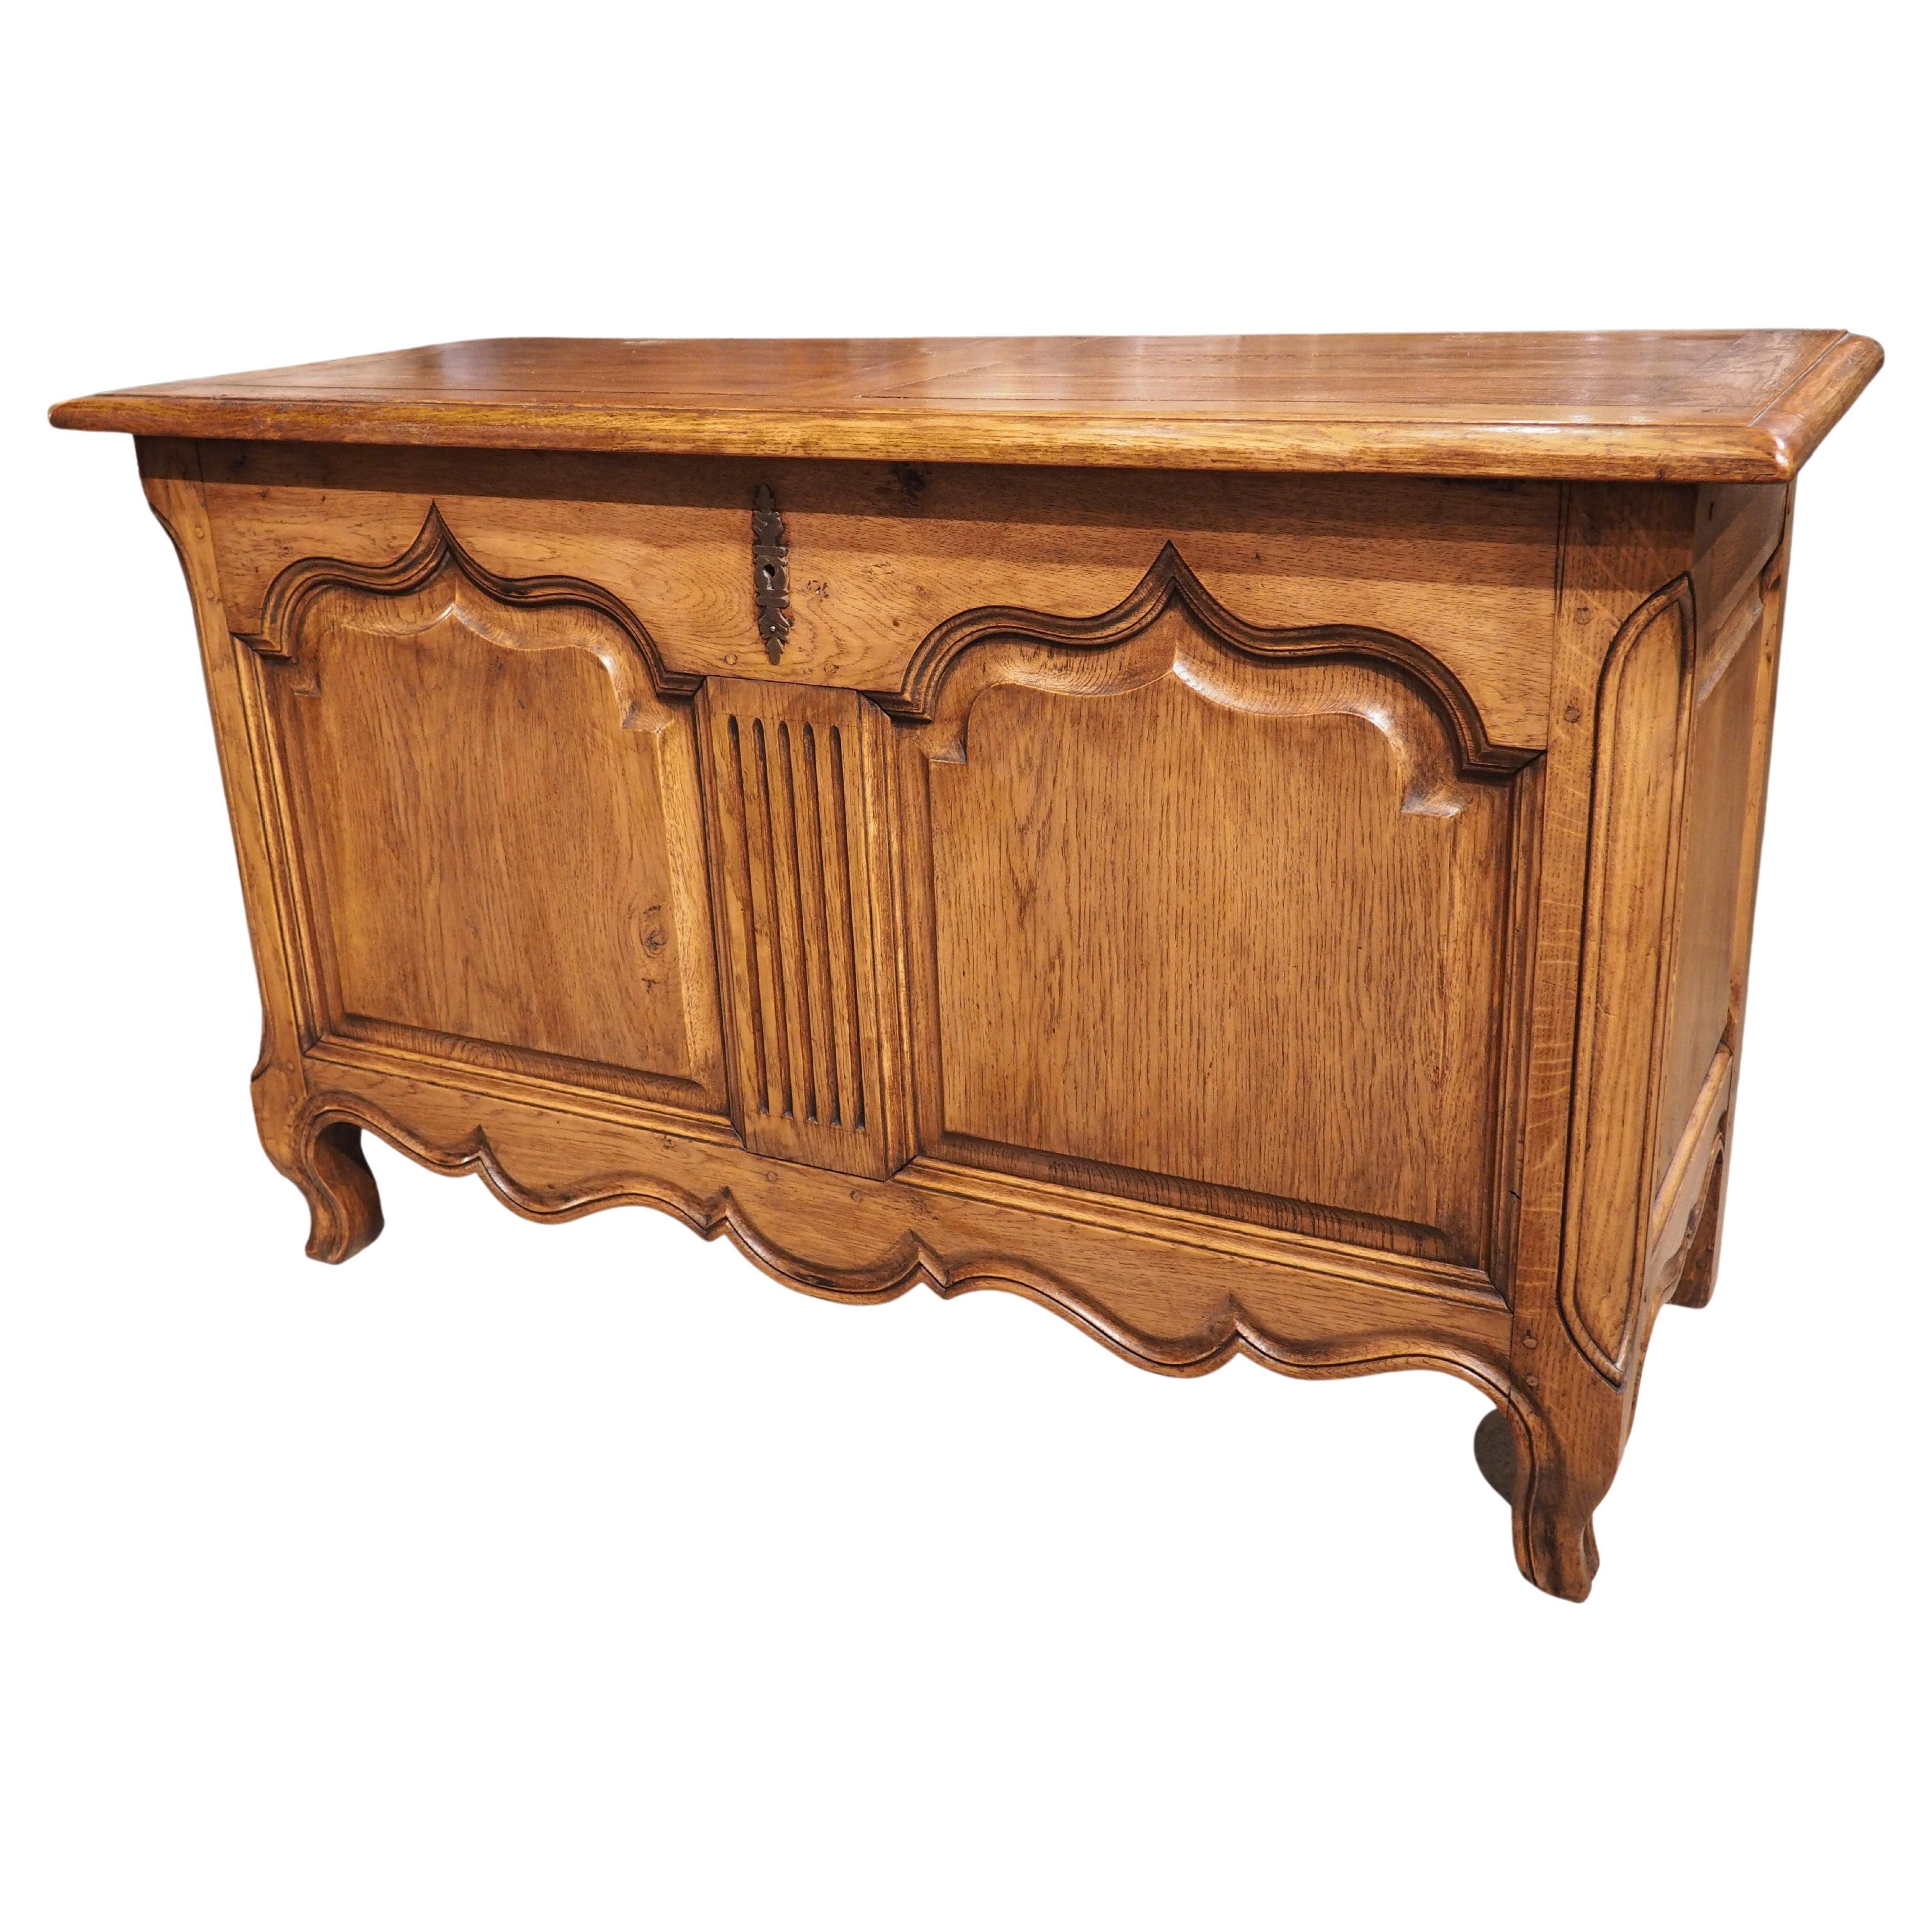 French Carved Oak Coffre Chest or Trunk with Shaped Legs, 20th Century For Sale